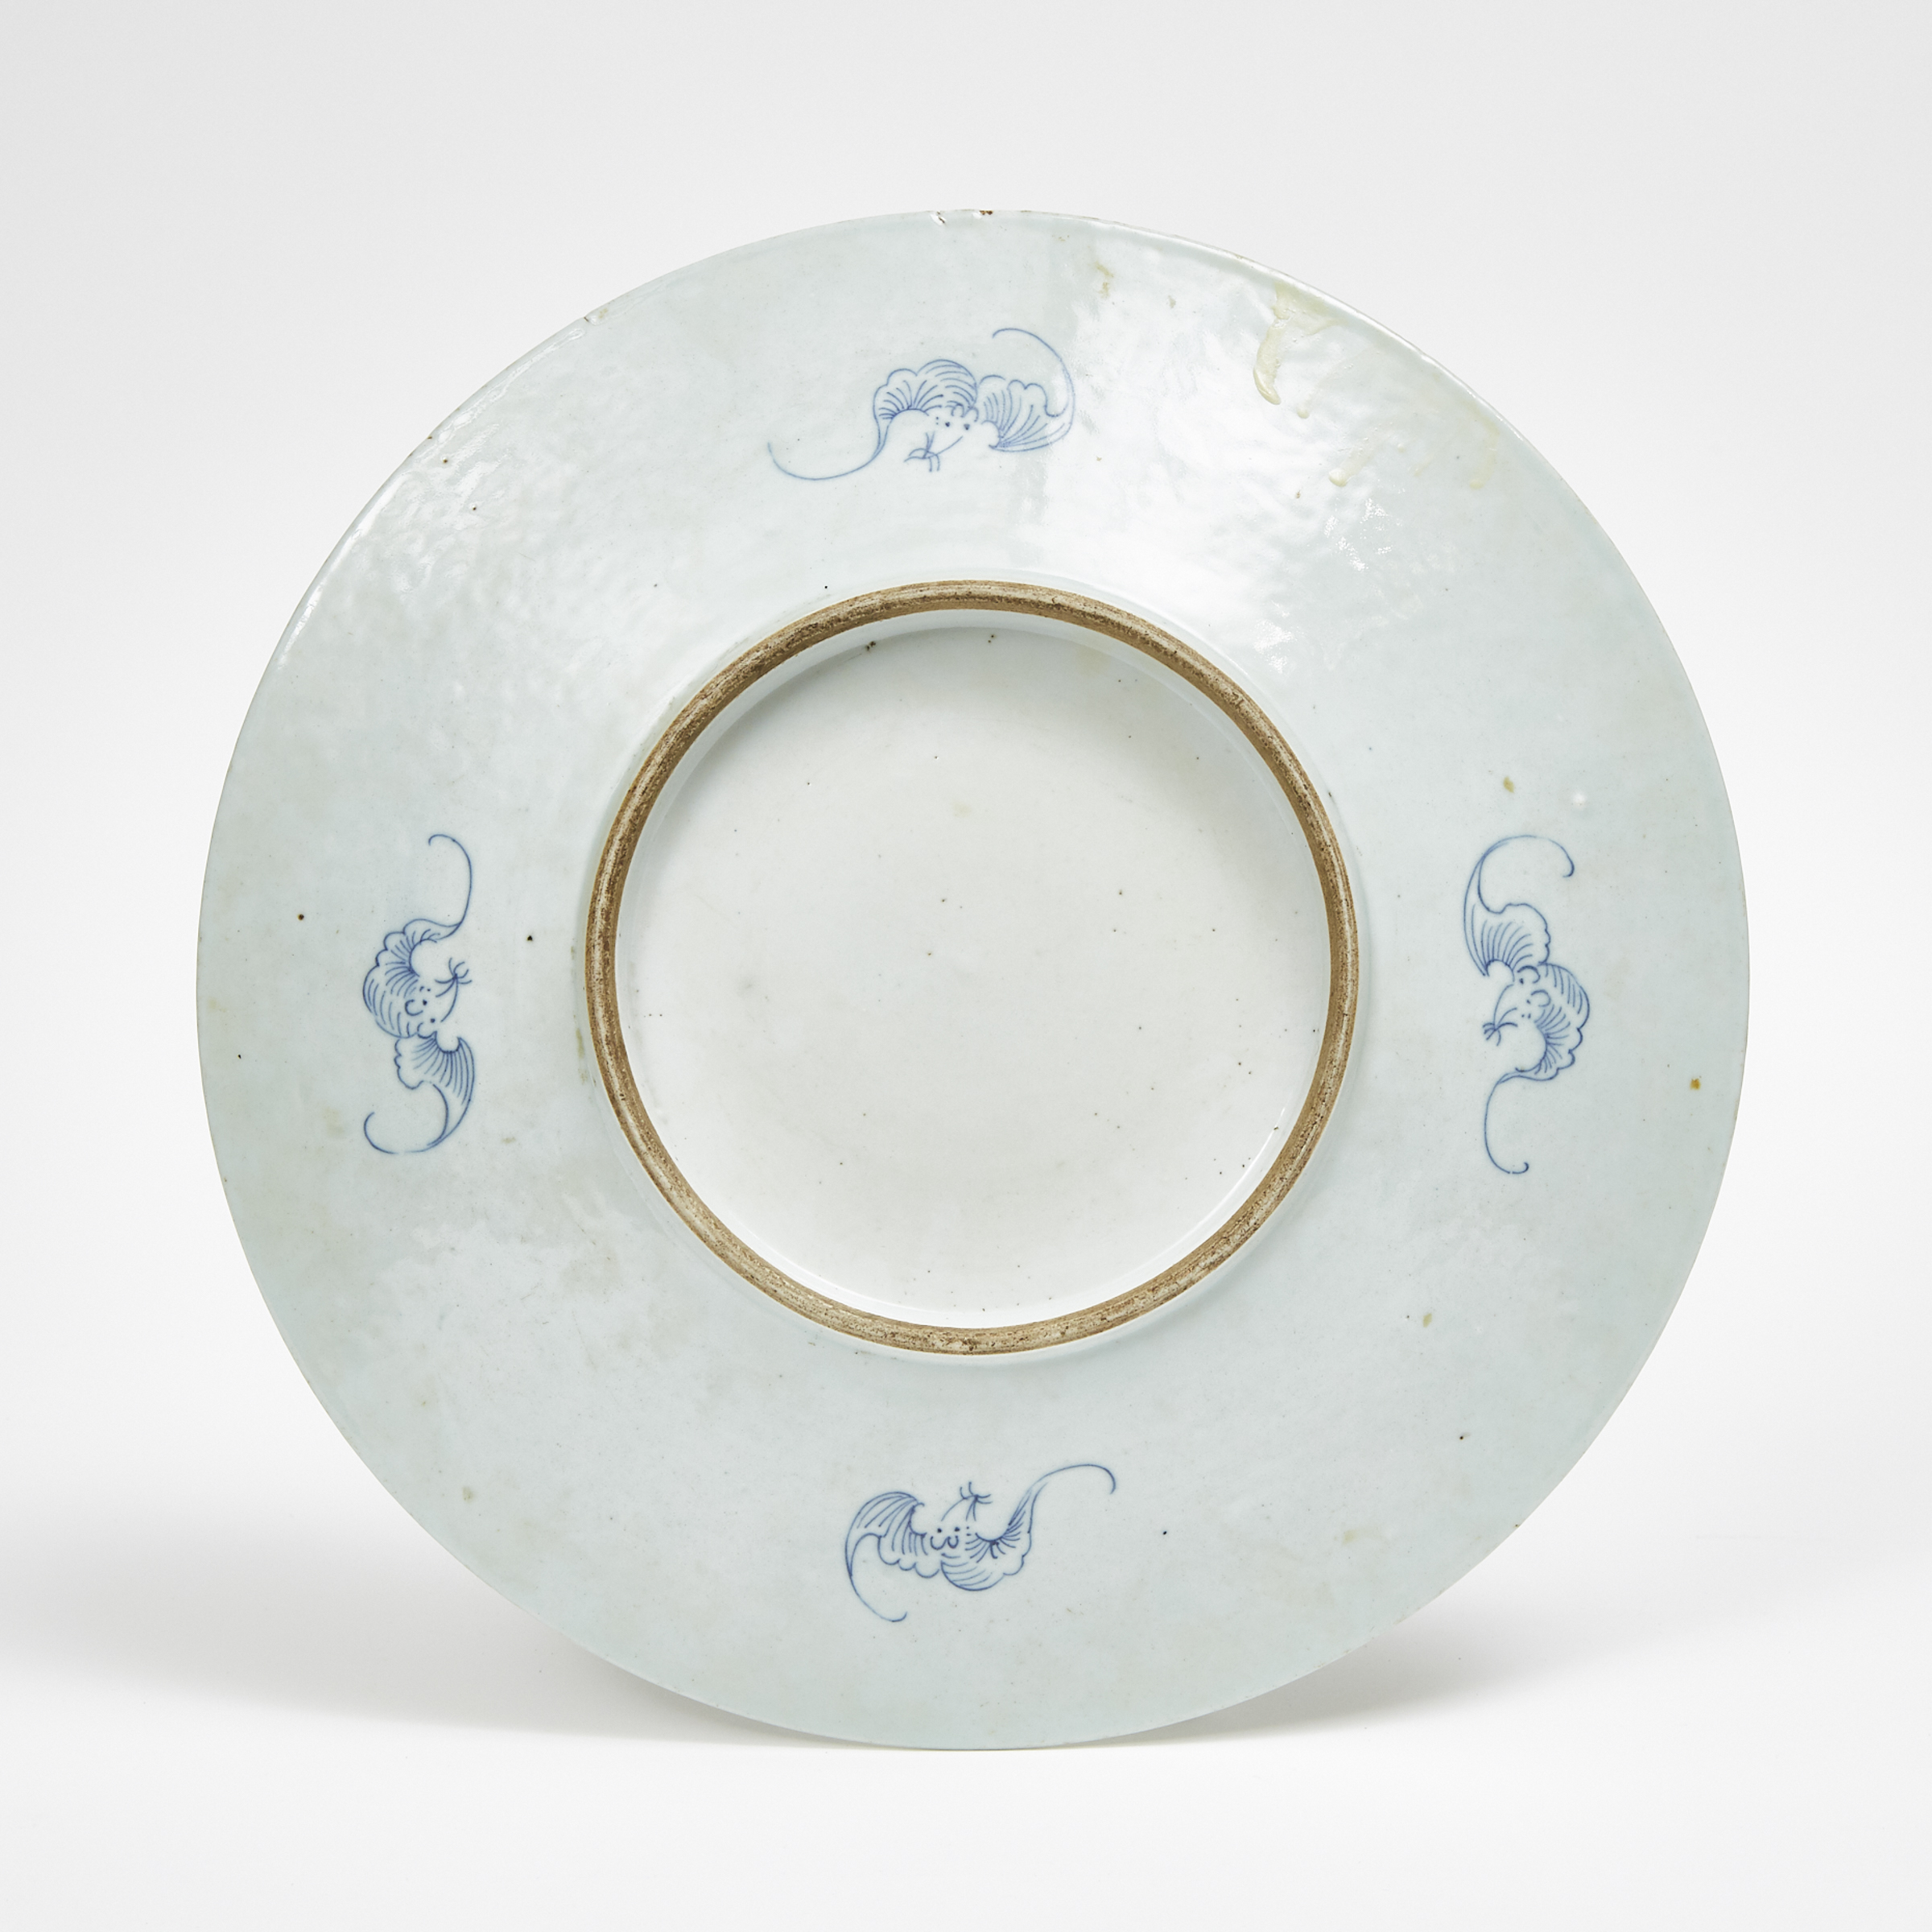 A Large Blue And White Charger, Late Qing Dynasty